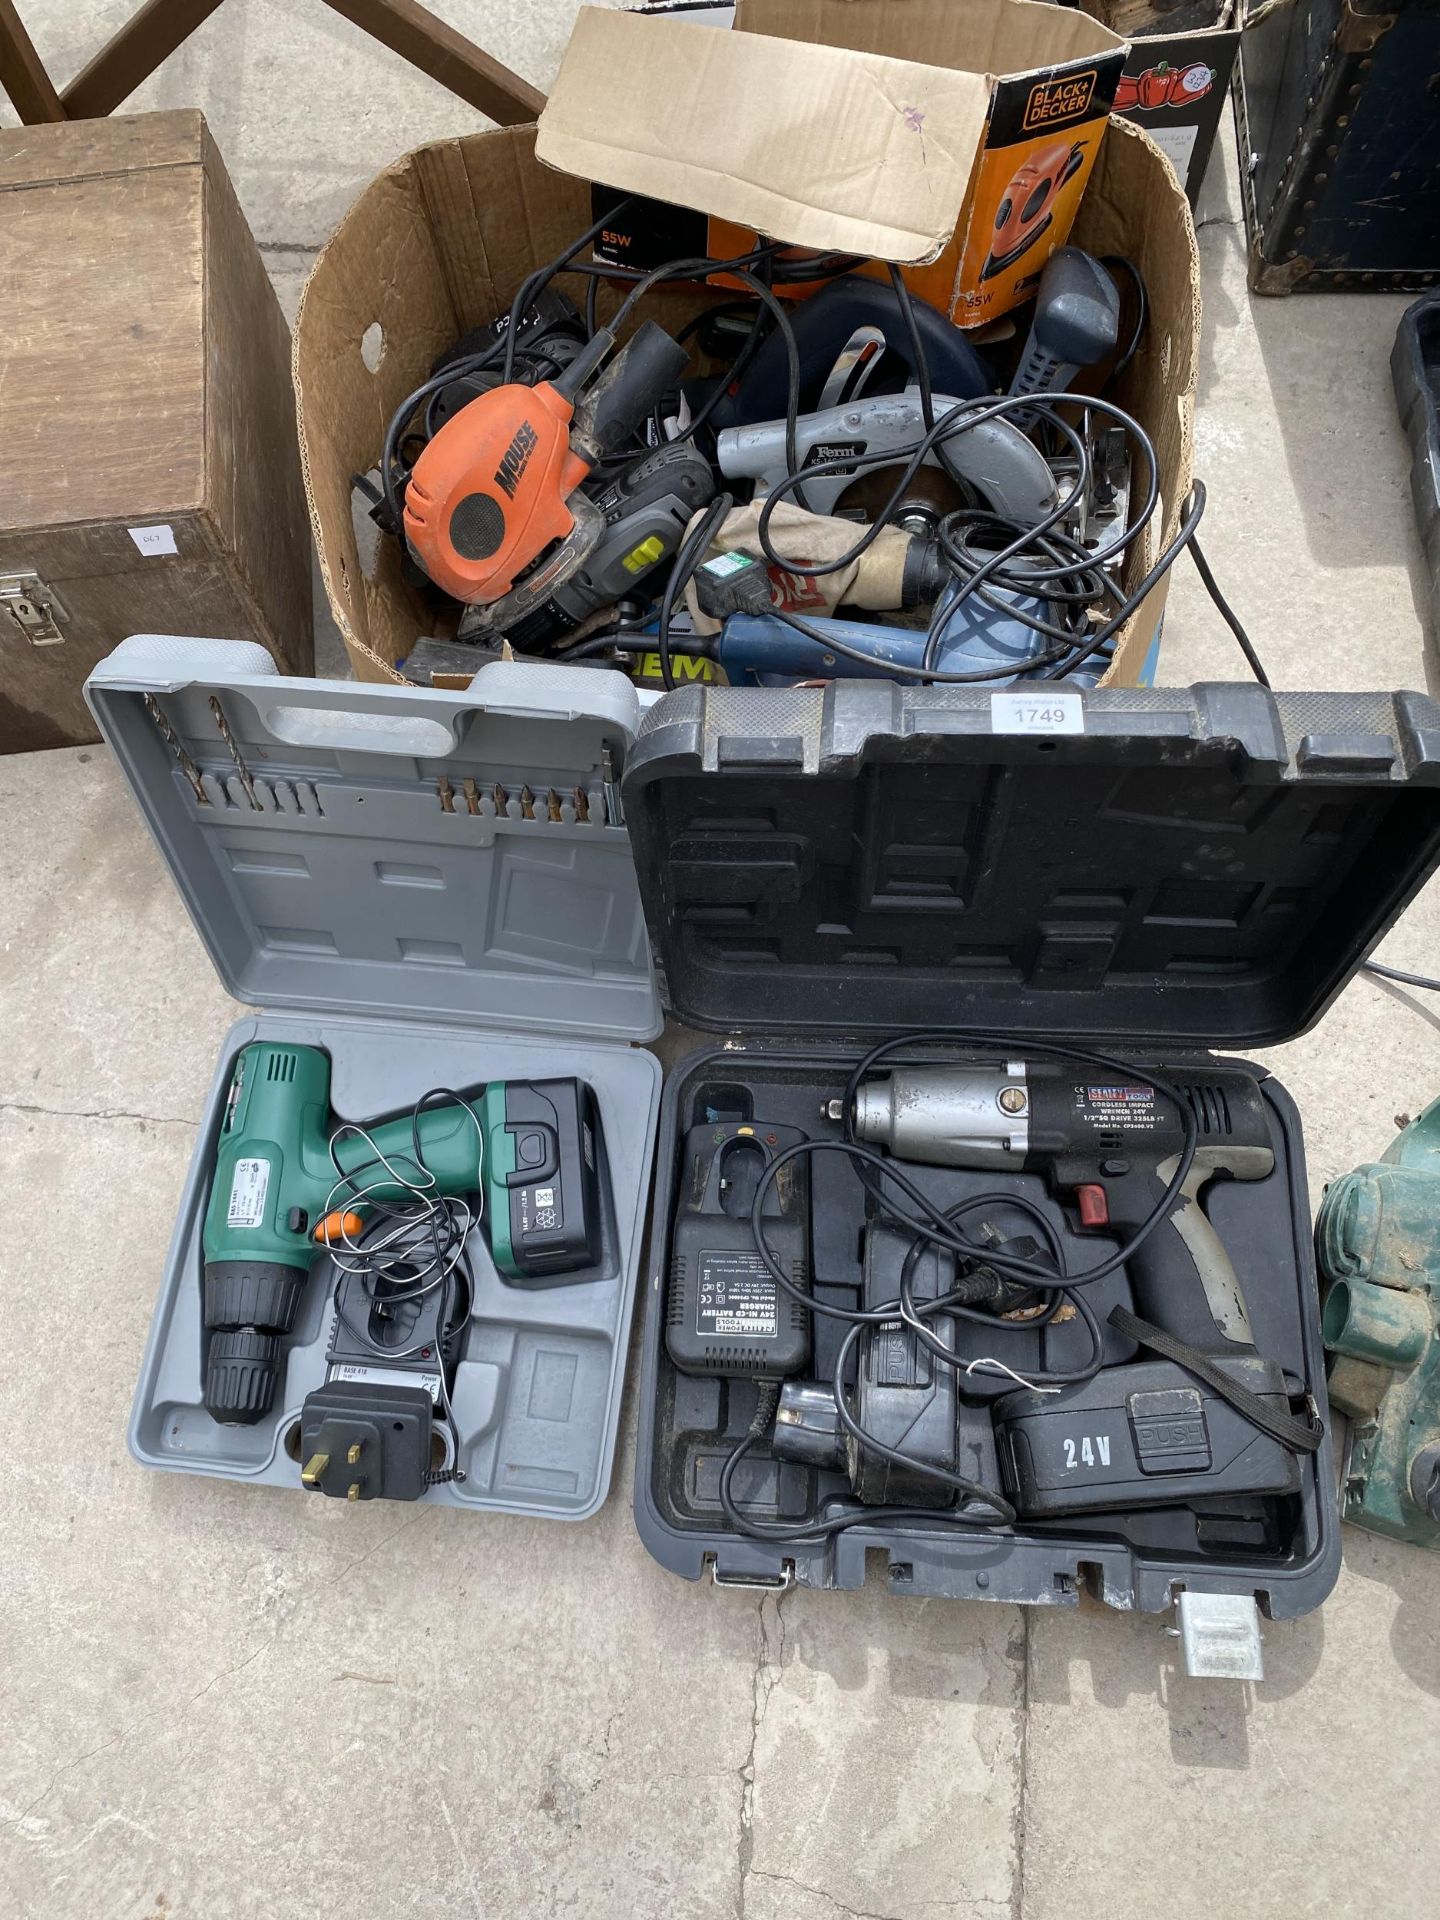 A LARGE ASSORTMENT OF POWER TOOLS TO INCLUDE BATTERY DRILLS, A FERM CIRCULAR SAW AND A PALM SANDER